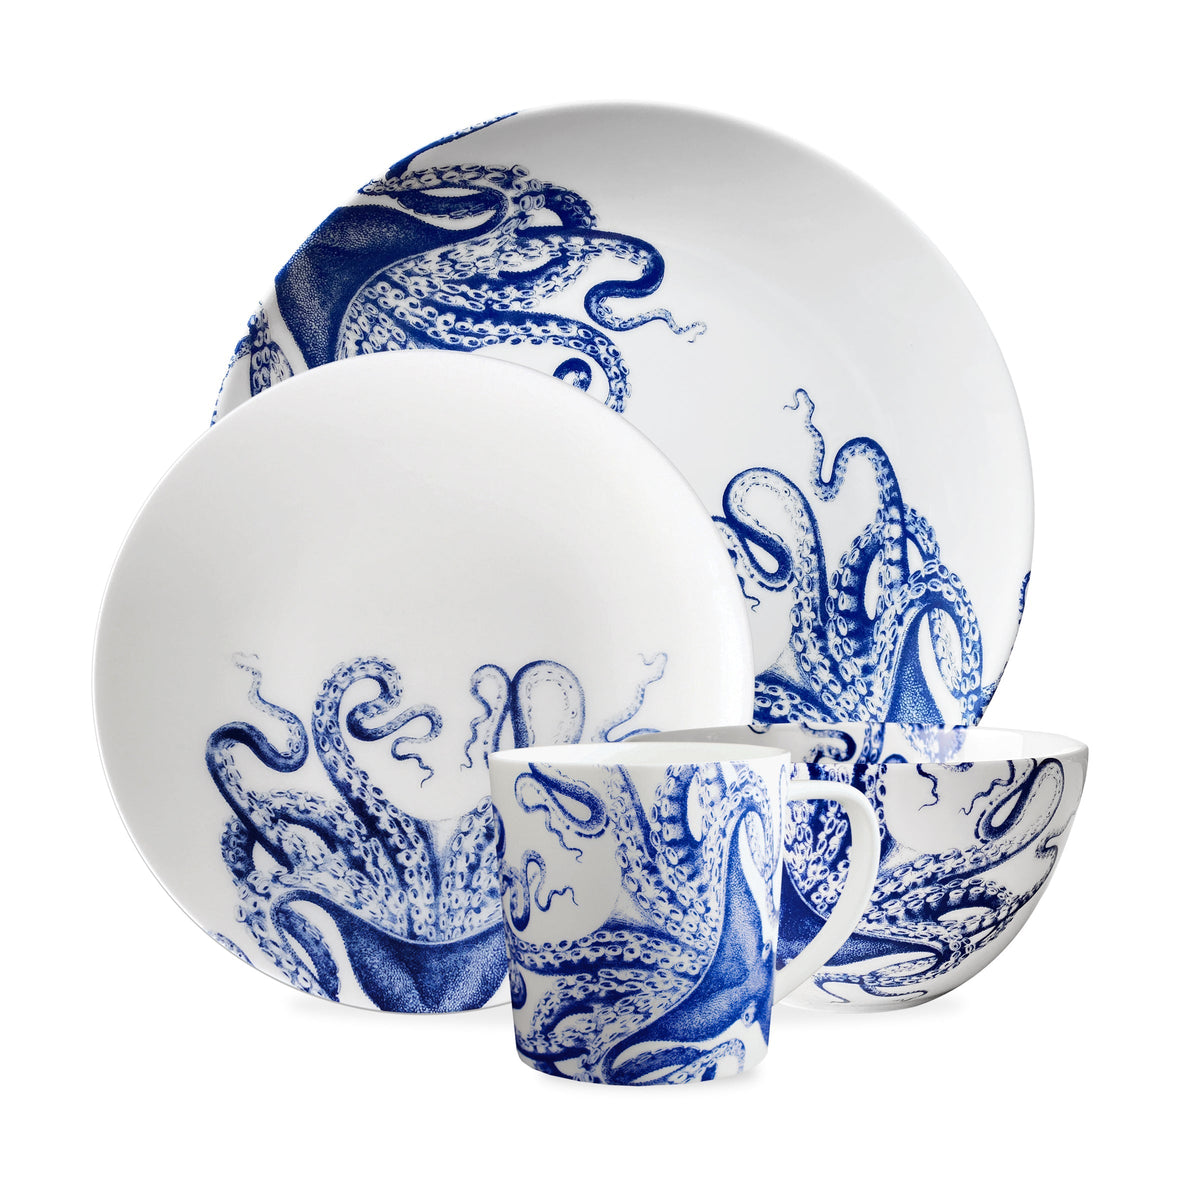 A Lucy Coupe Dinner Plate by Caskata Artisanal Home featuring blue Lucy the octopus designs, including two coupe dinner plates, a bowl, and a cup.